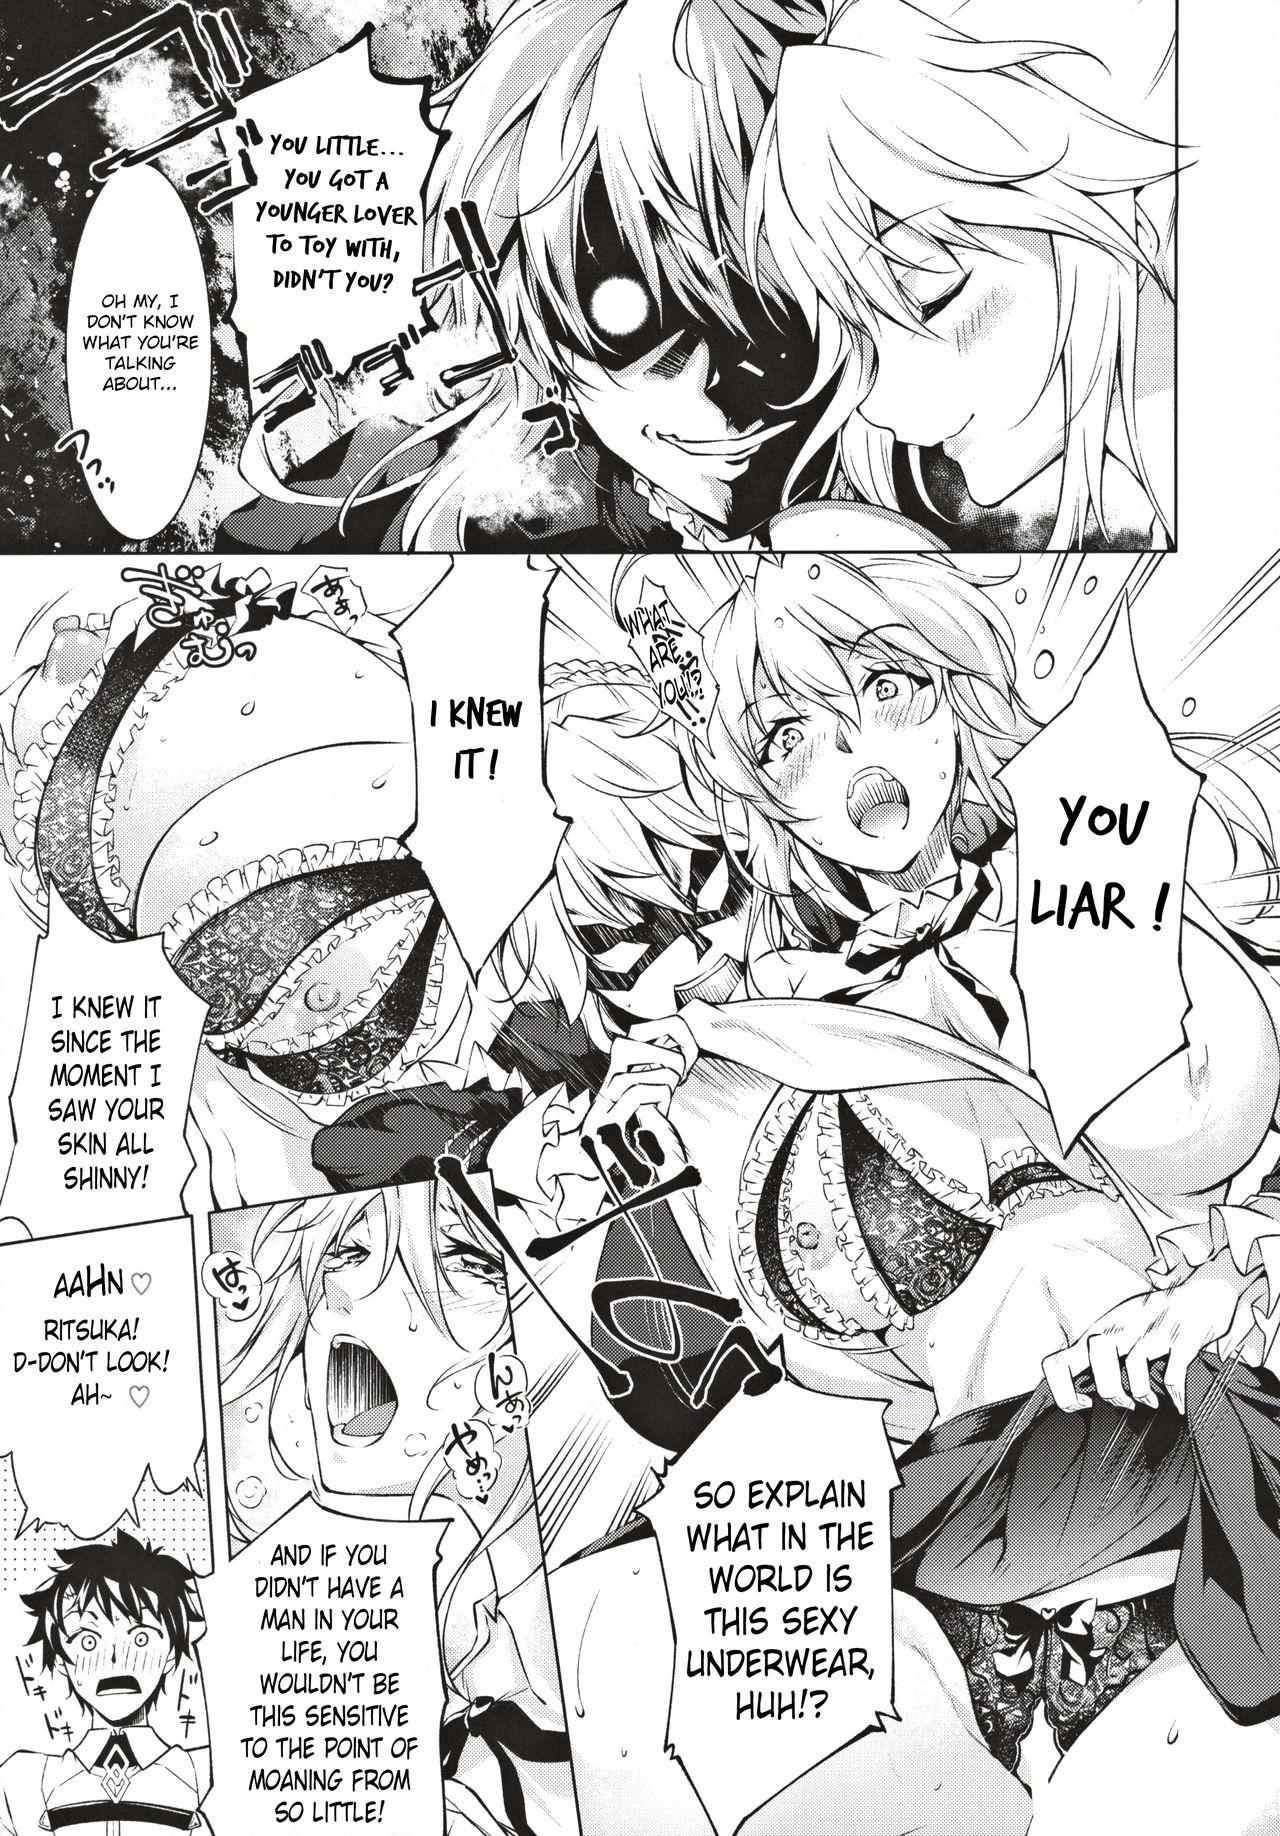 Sweet Pendra Shimai no Seijijou | The Pendragon twin sisters' sexual situation - Fate grand order Funny - Page 6